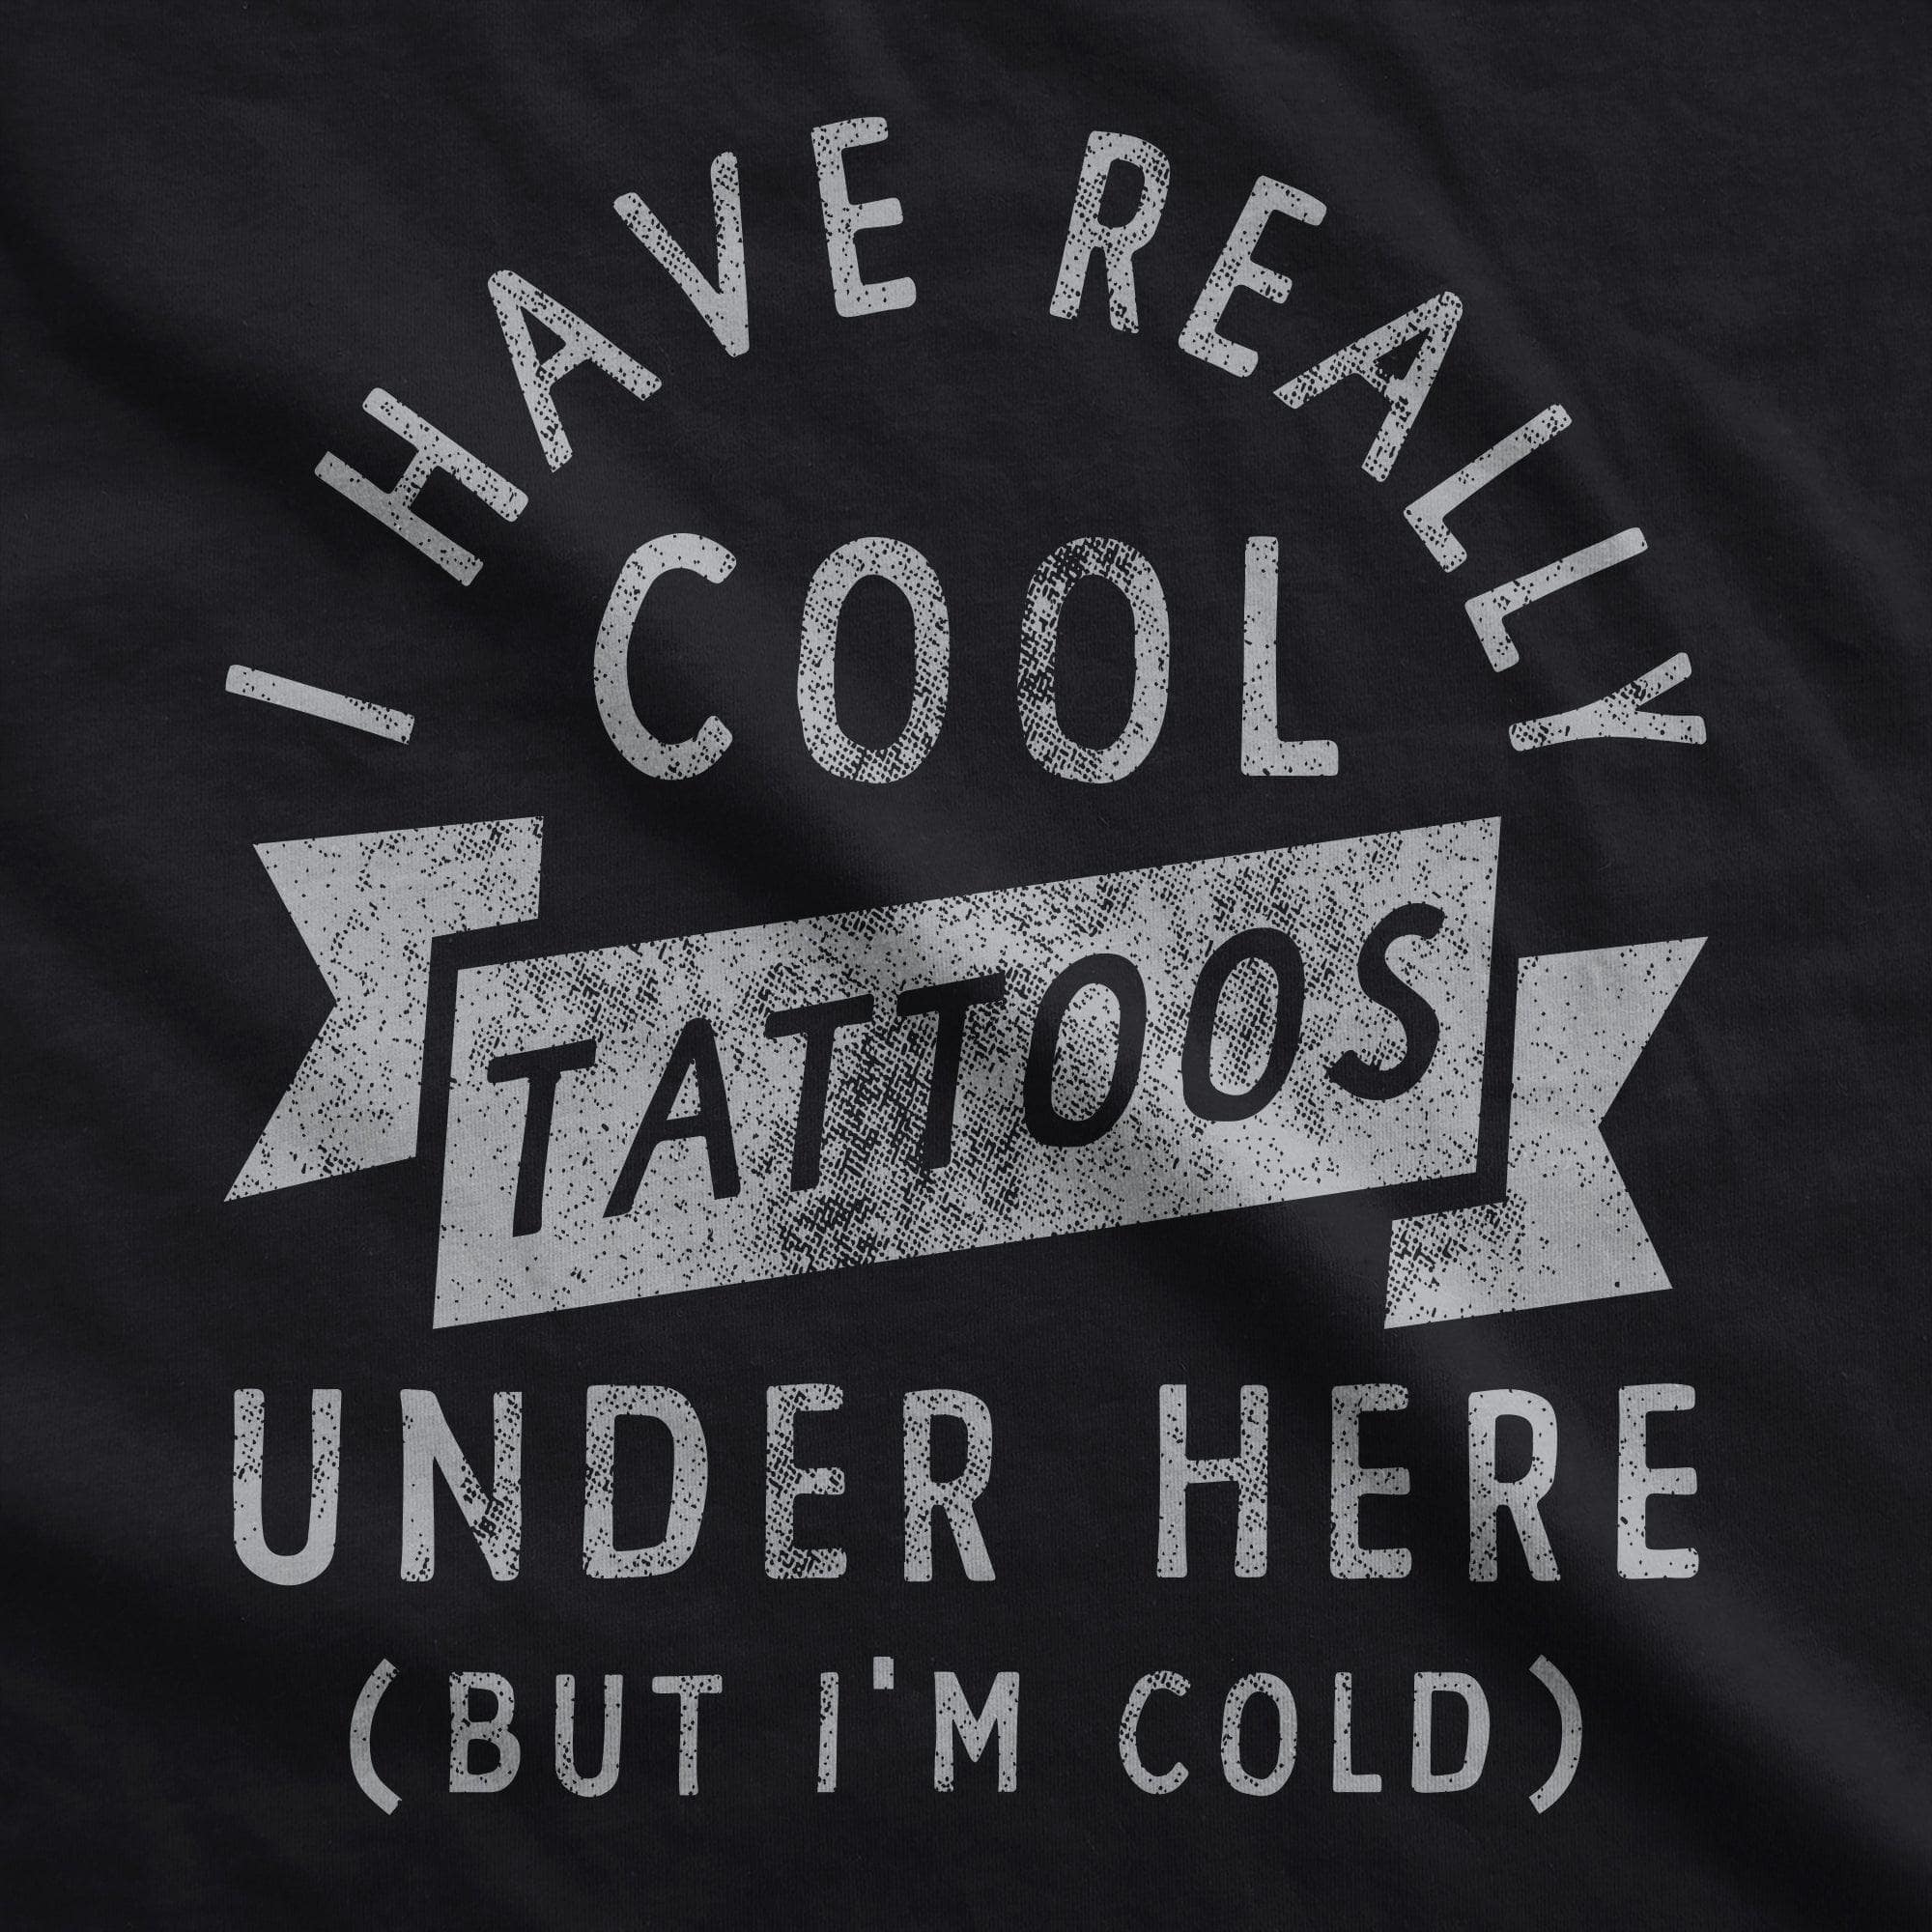 I Have Really Cool Tattoos Under Here But Im Cold Hoodie  -  Crazy Dog T-Shirts